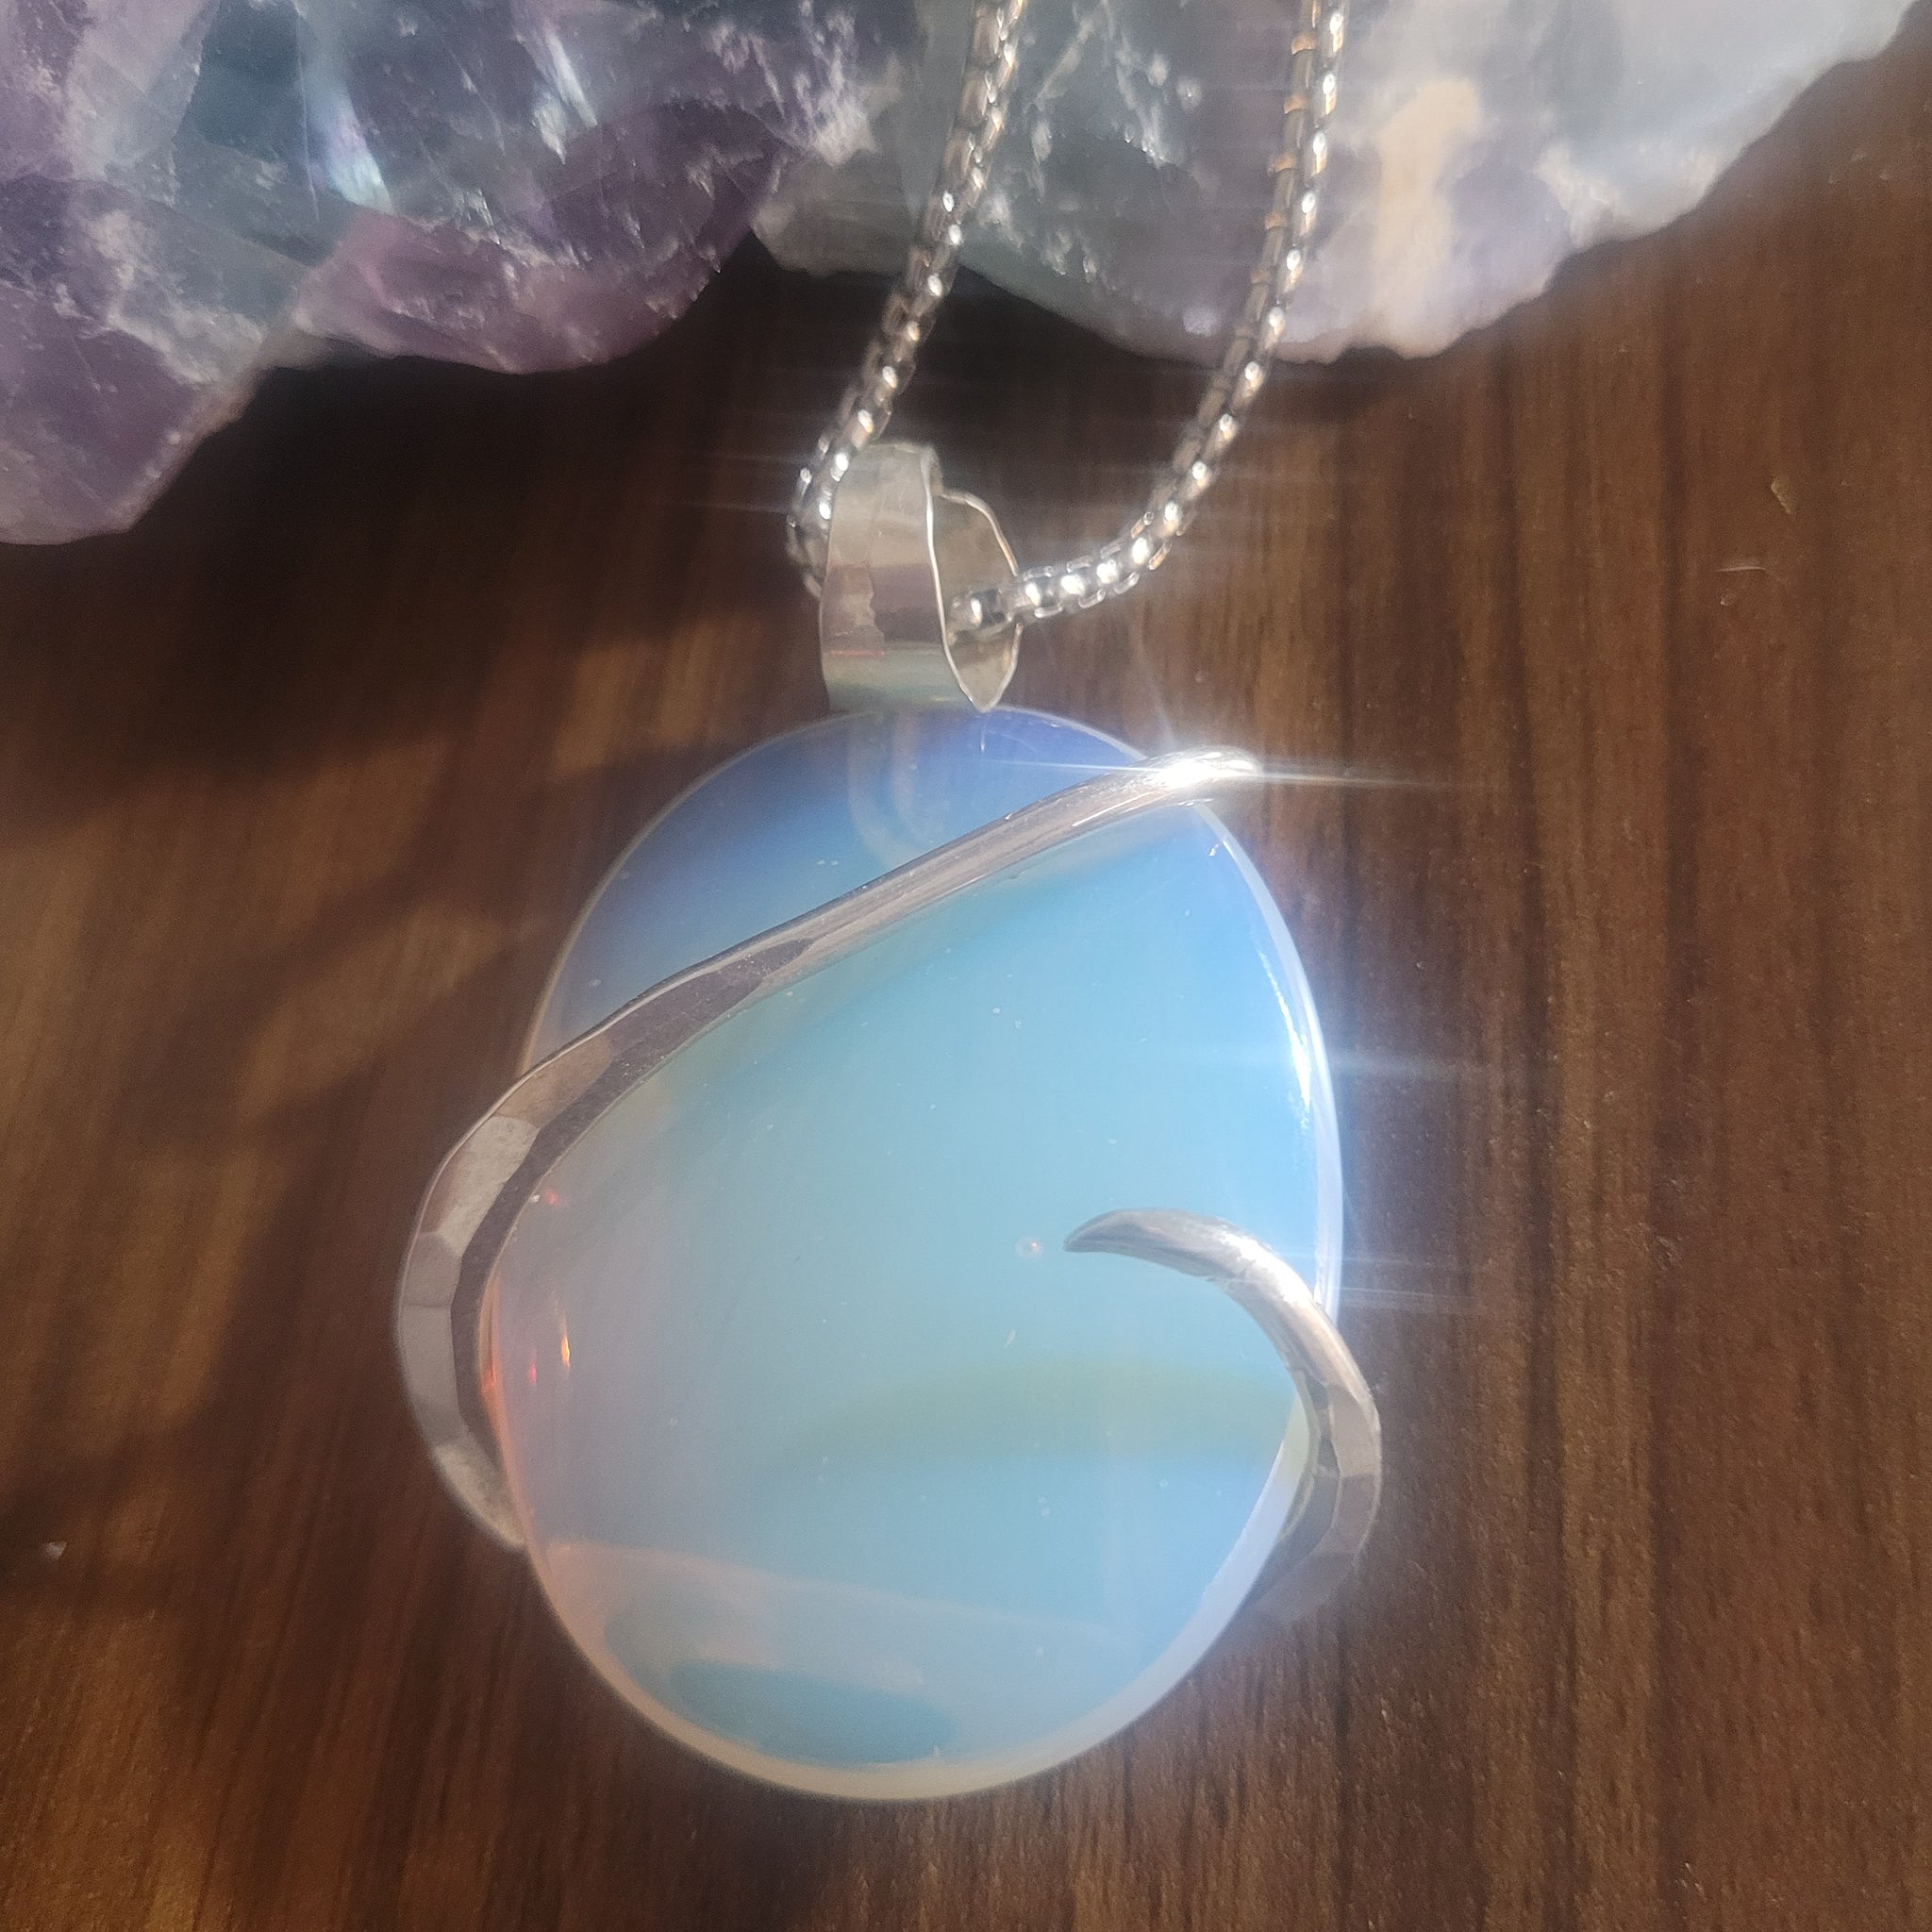 Opalite and Sterling Silver Stone Pendant